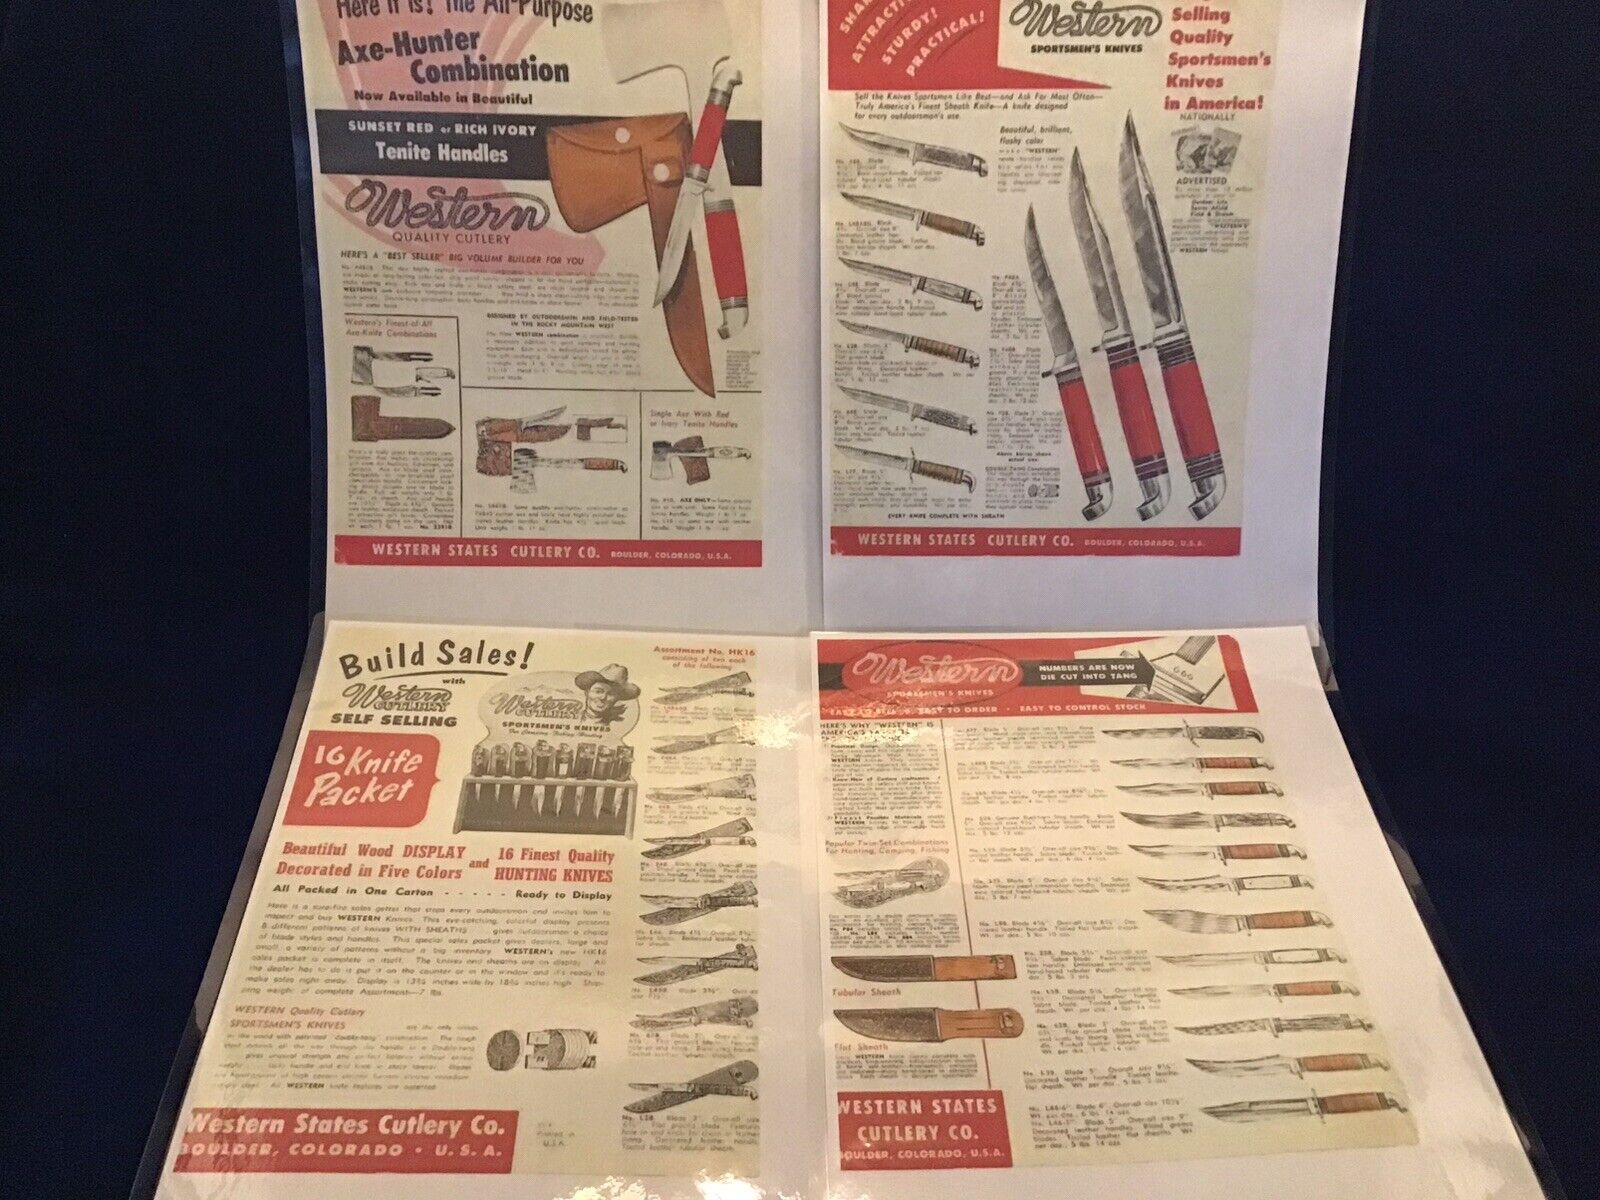 VINTAGE 4 PAGE LAMINATED COPY OF 1955 WESTERN QUALITY CUTLERY KNIVES CATALOG